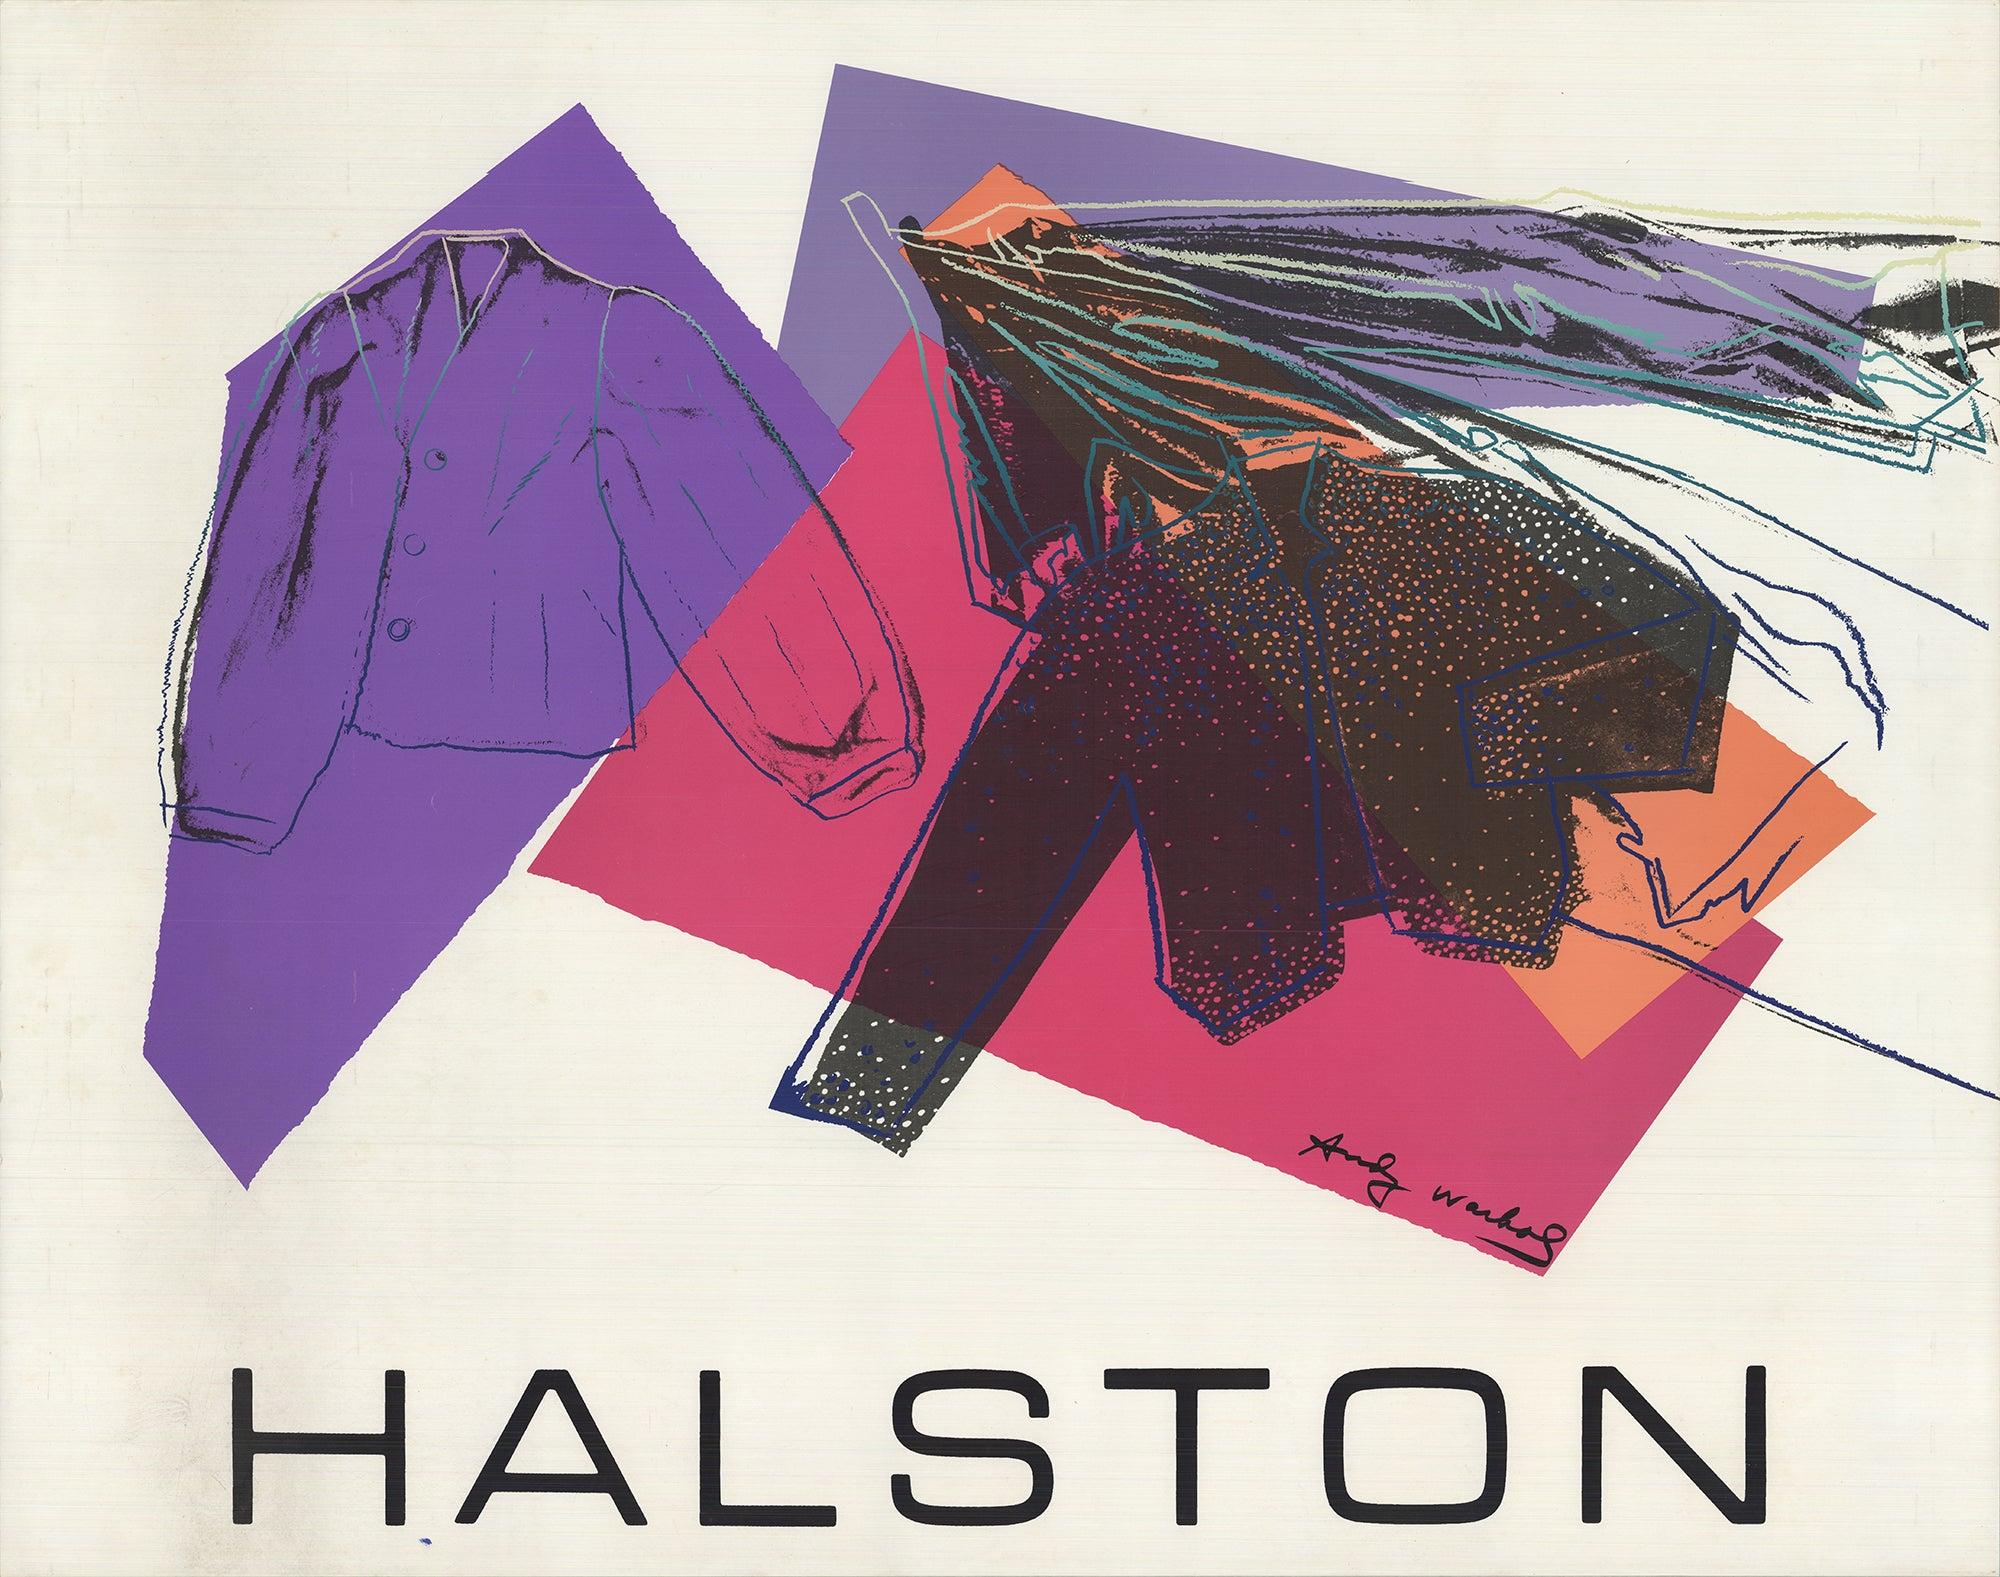 ANDY WARHOL Halston Advertising Campaign Poster, 1982 - Print by Andy Warhol